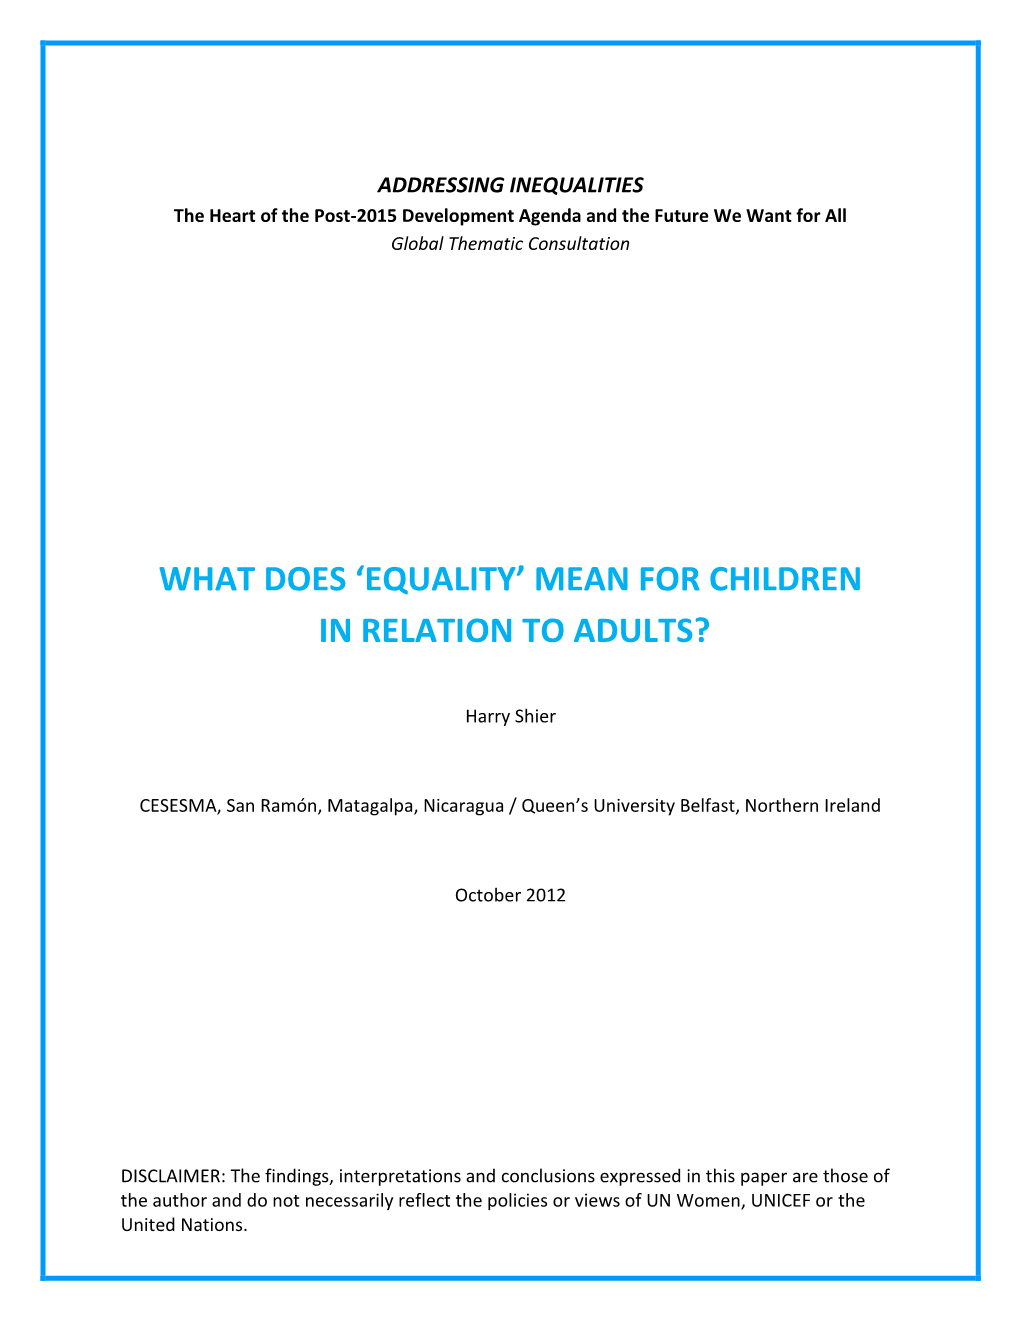 Equality’ Mean for Children in Relation to Adults?